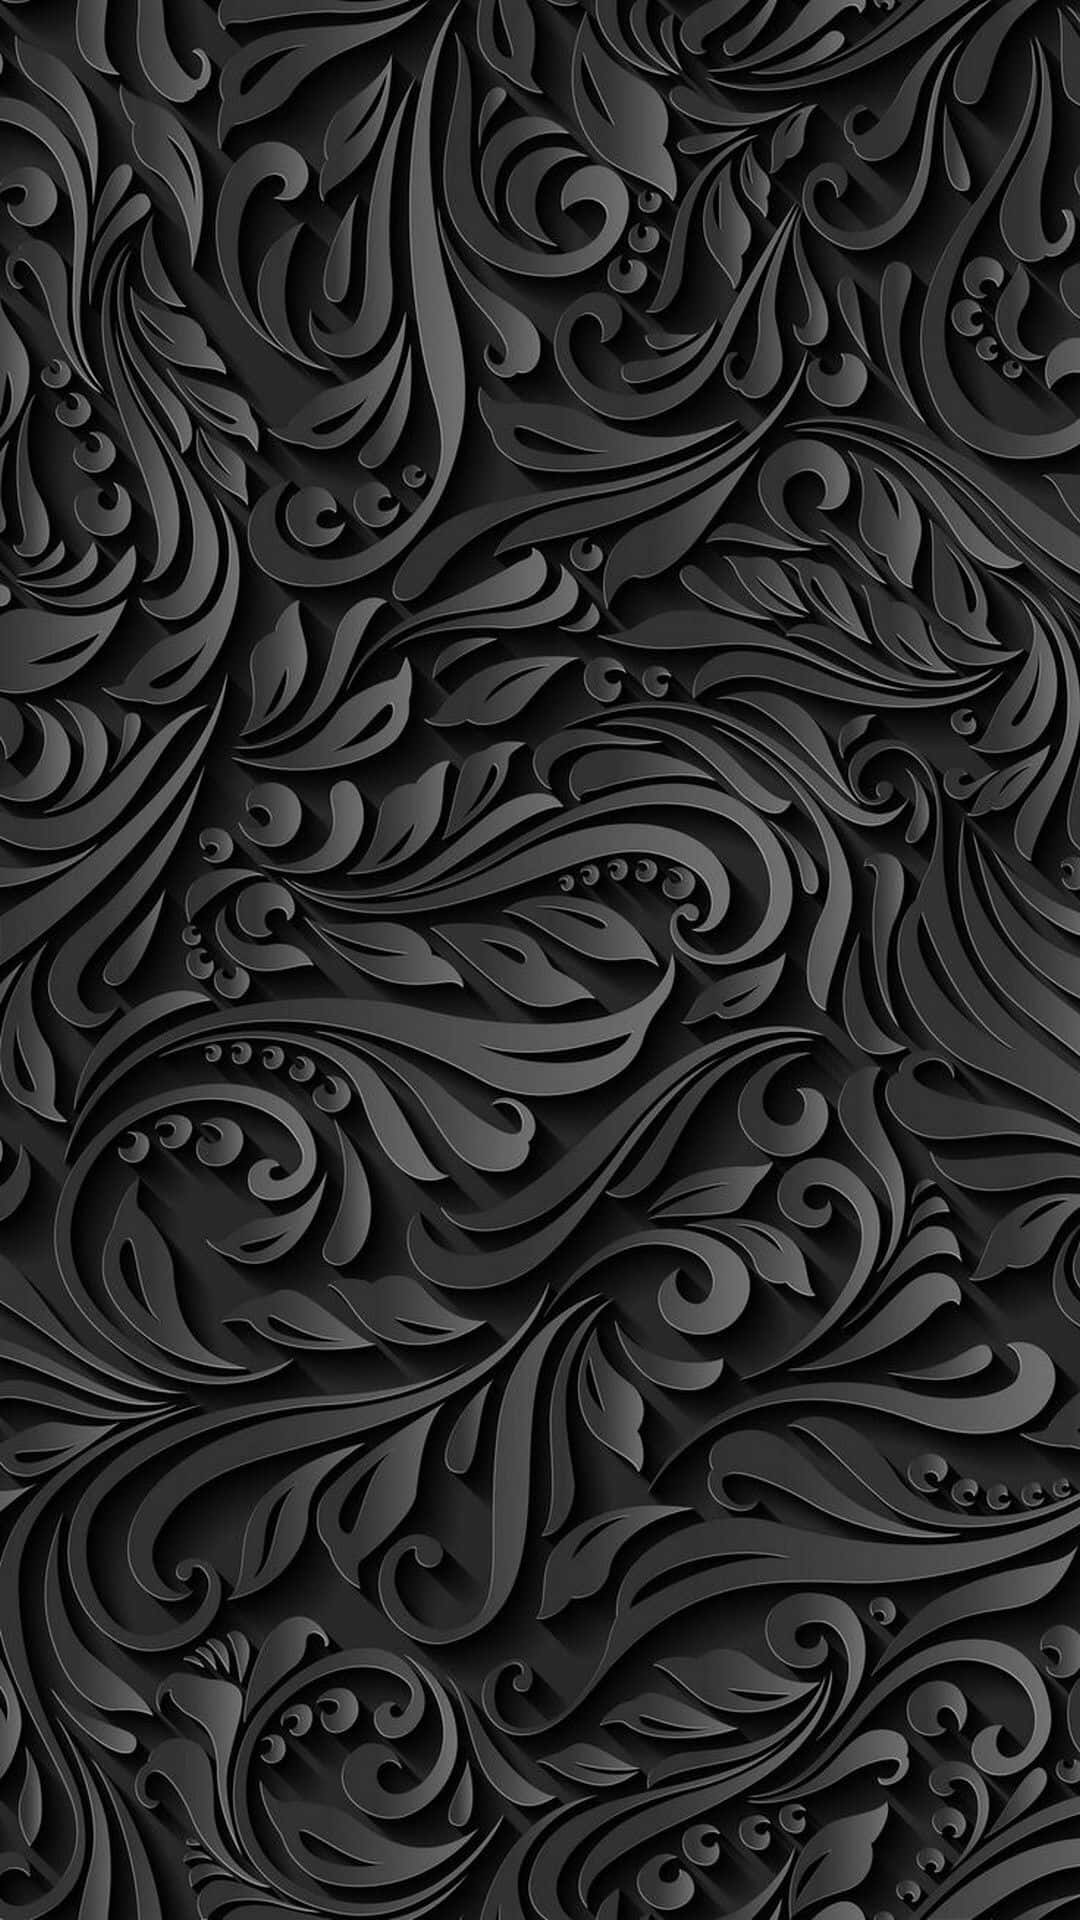 The minimalist beauty of this black pattern